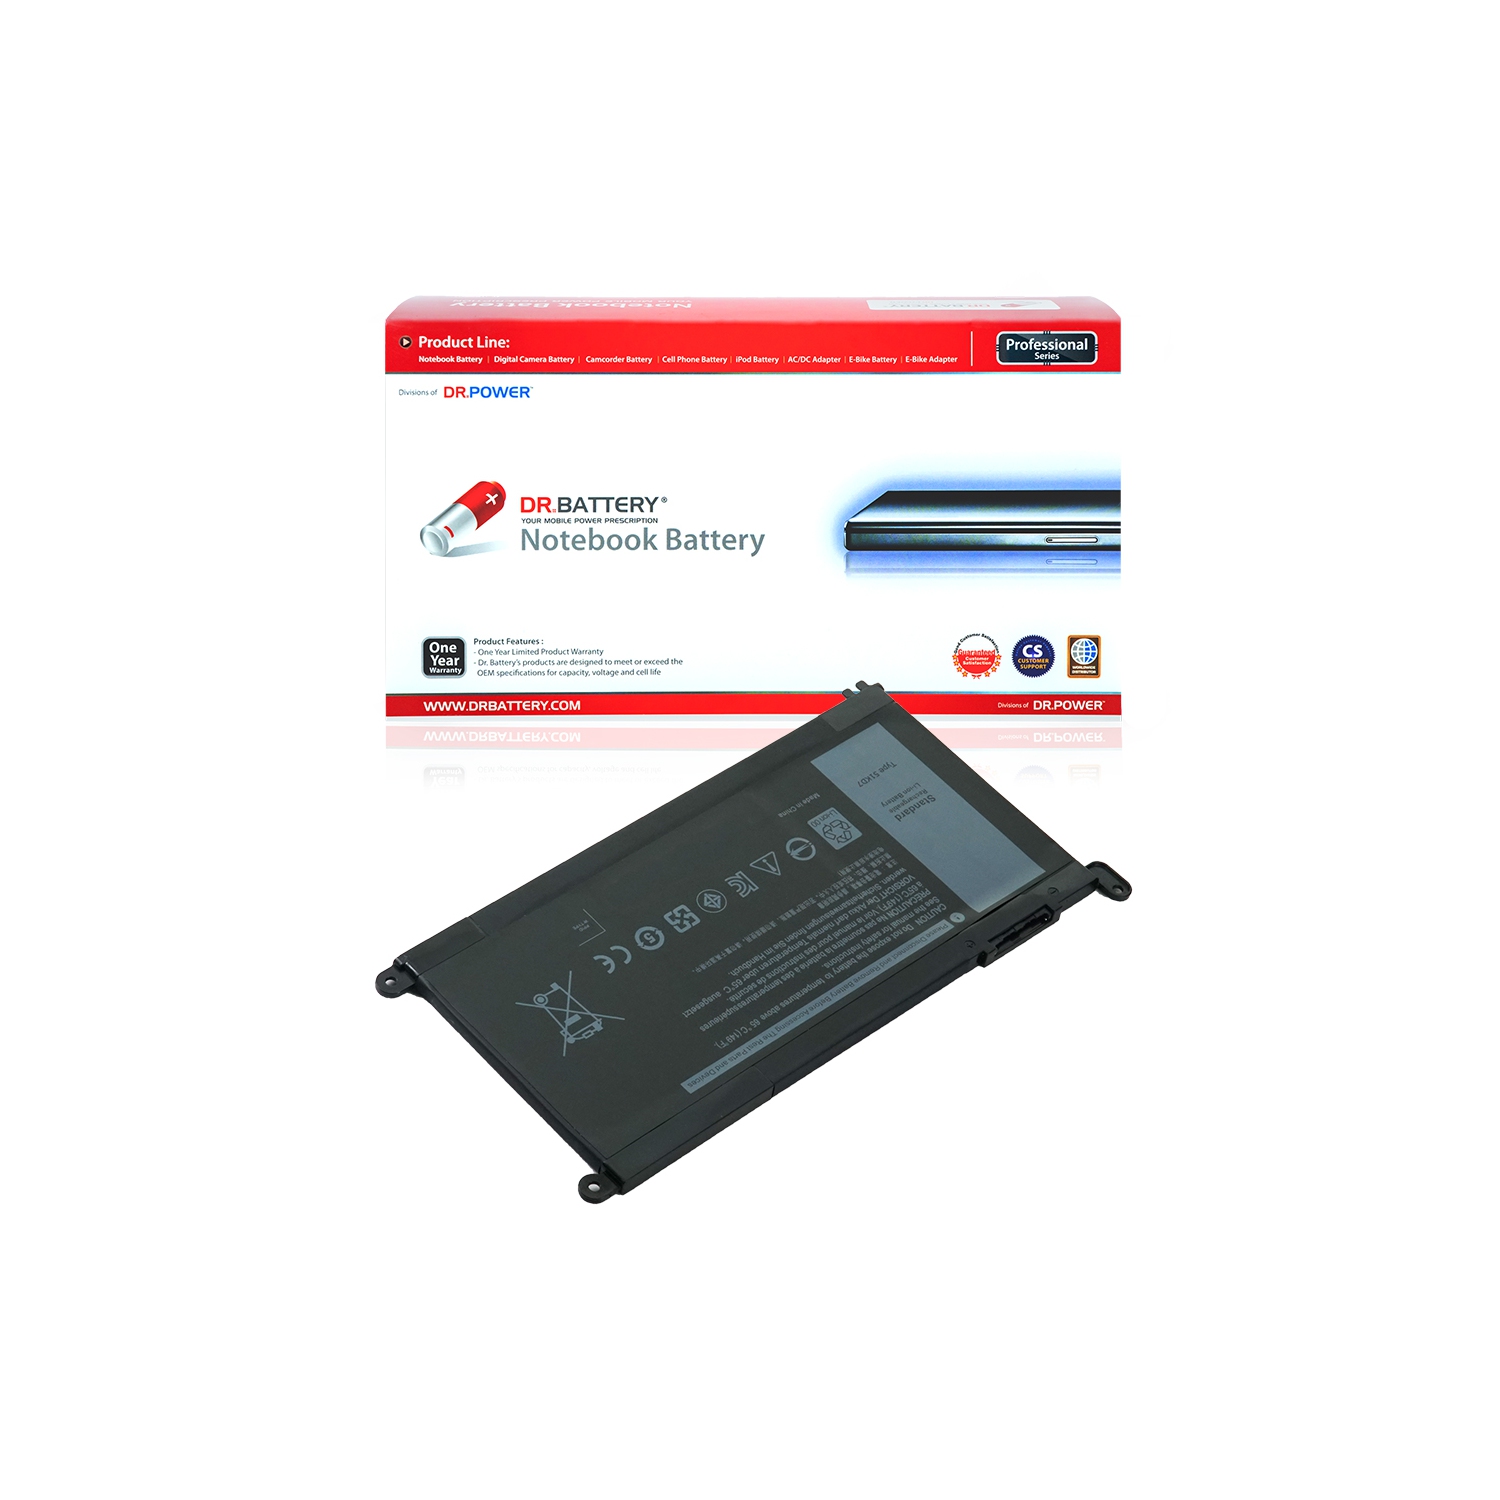 DR. BATTERY - Replacement for Dell Chromebook 11 Chromebook 3189 Education 2-in-1 / 3180 / Chromebook 11 3189 / 51KD7 / FY8XM